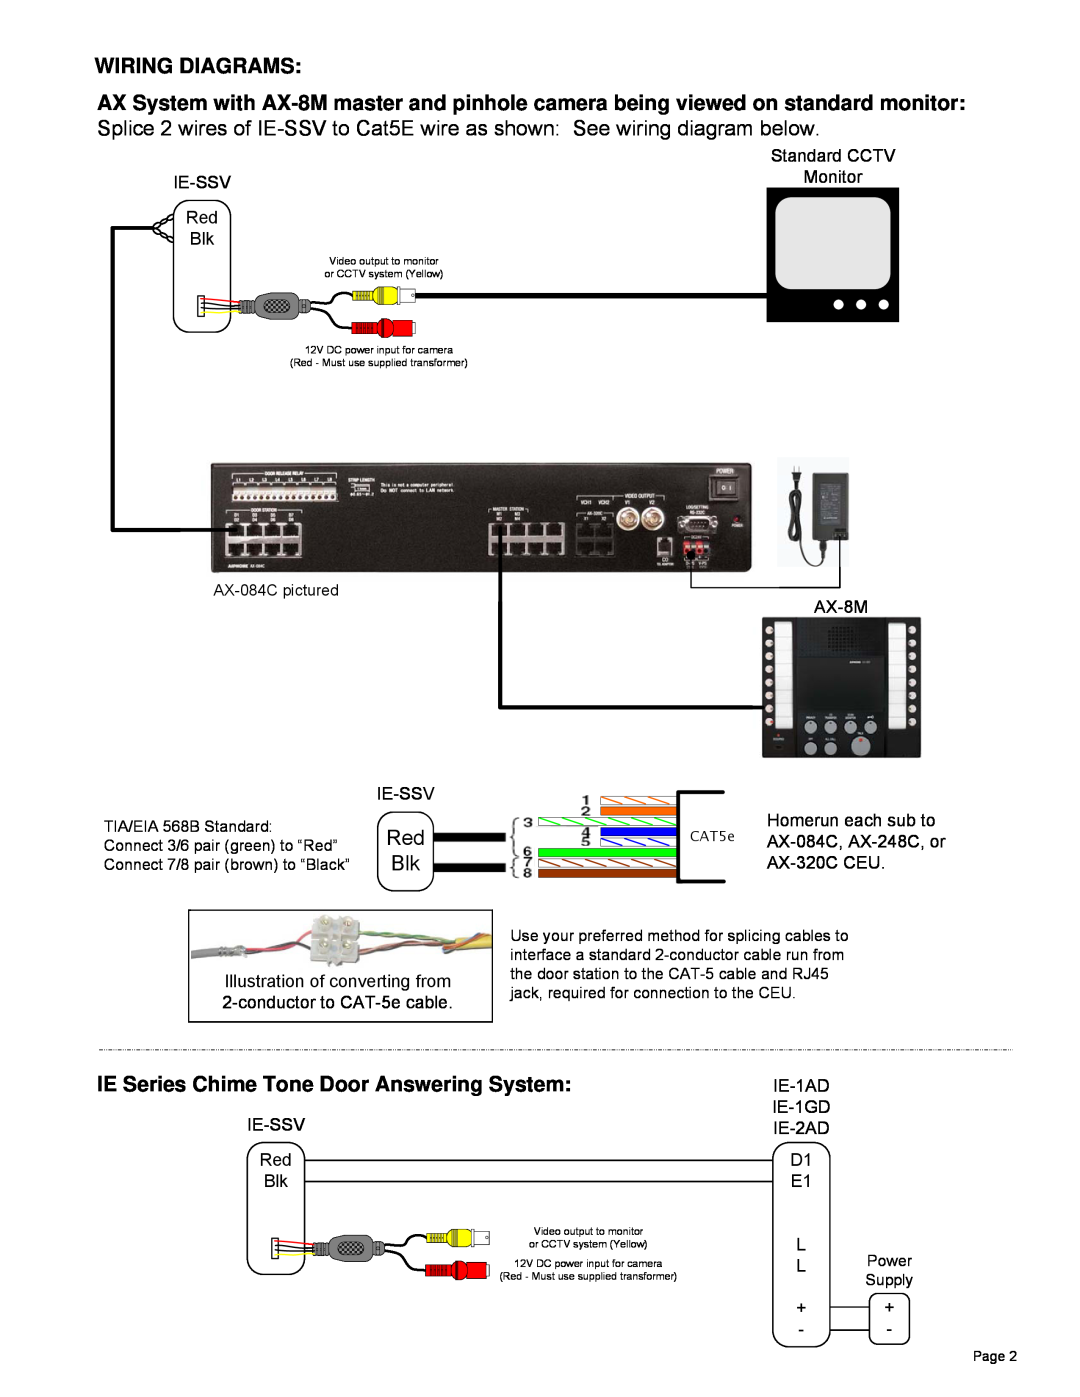 Aiphone ie-ssv manual Wiring Diagrams, IE Series Chime Tone Door Answering System 